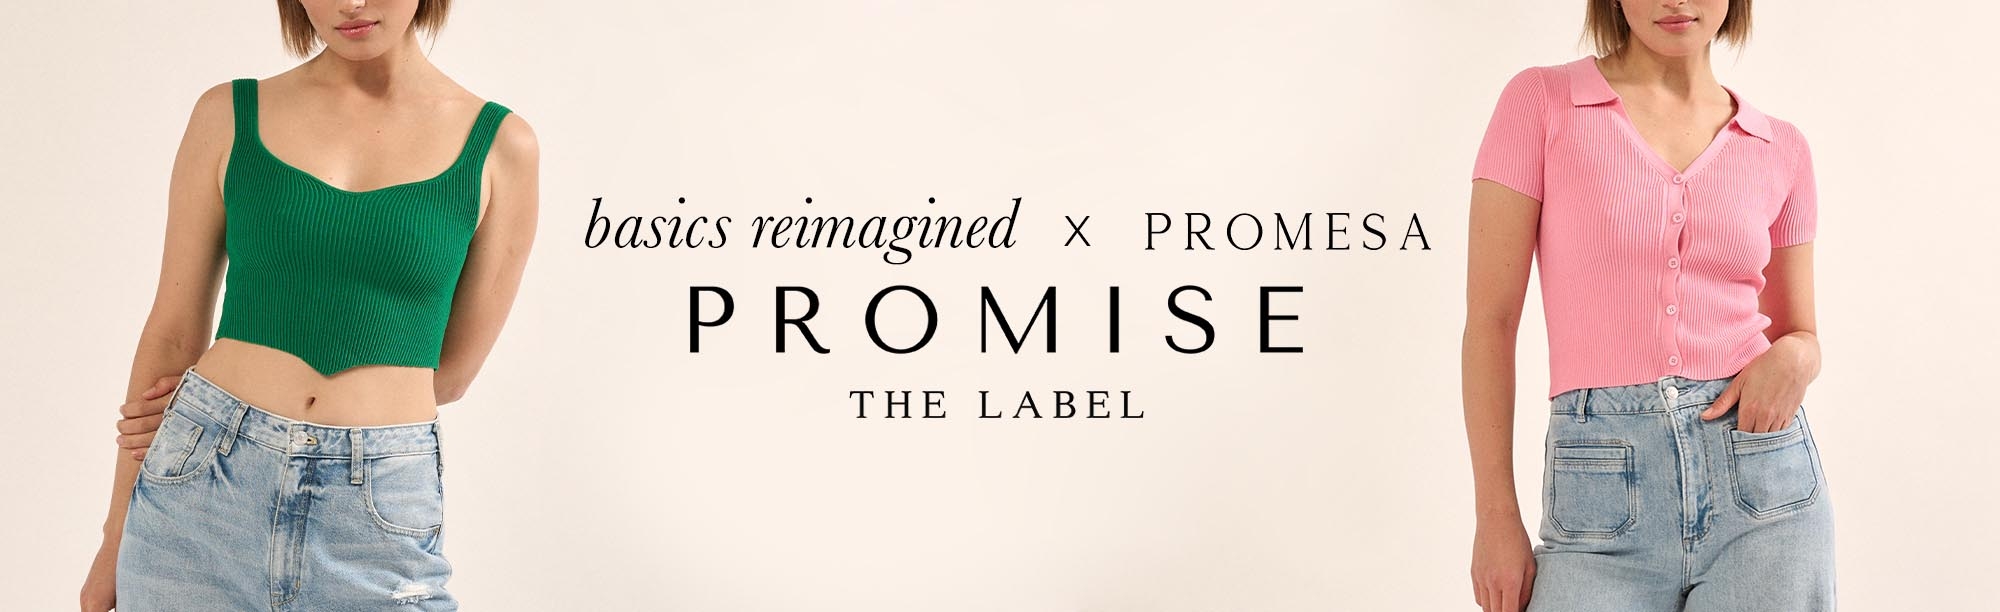 Promise the Label